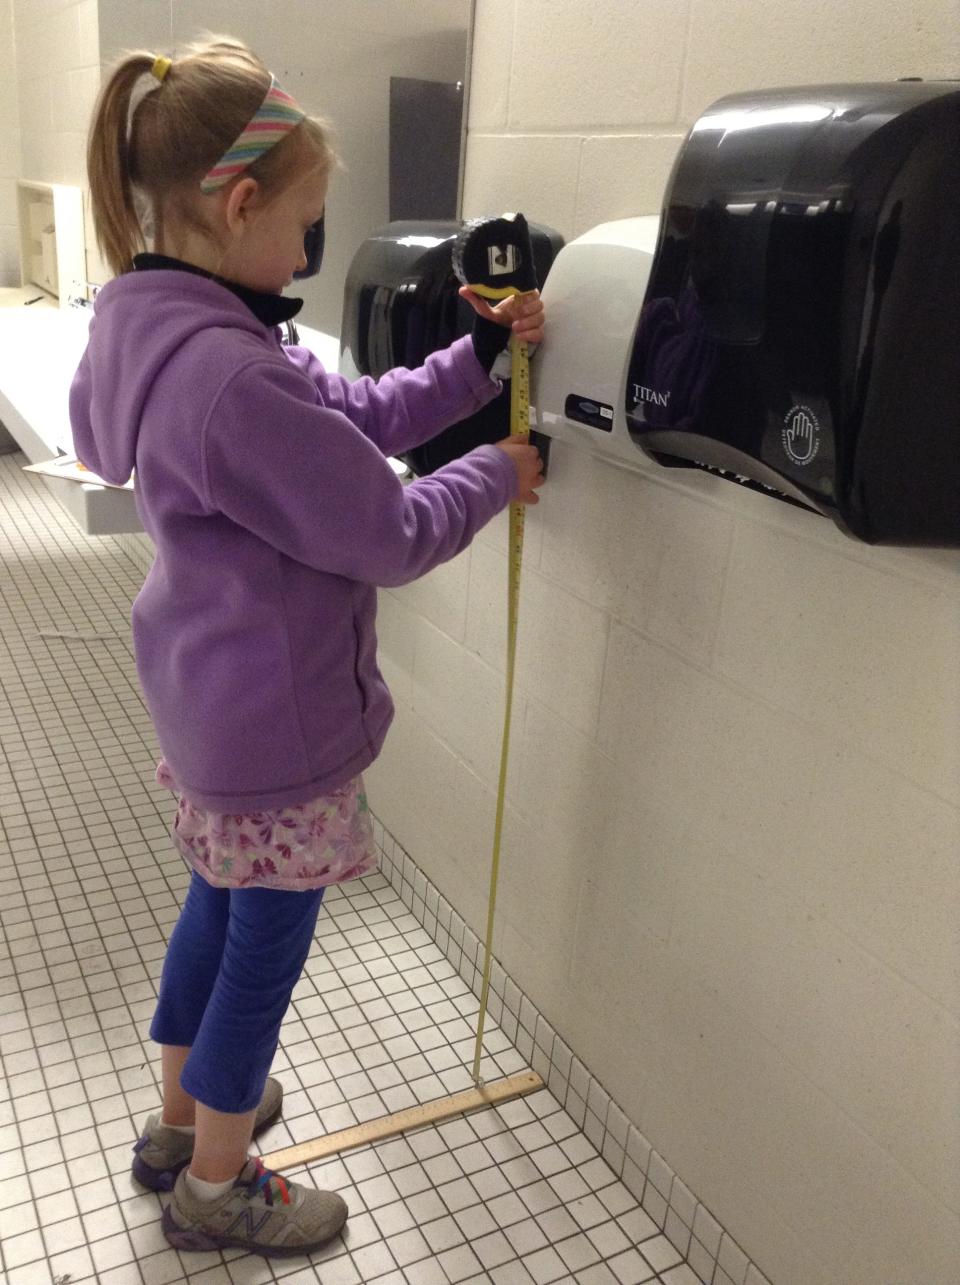 Nora Keegan had a question: do hand dryers hurt children's hears? She decided to investigate, and ended up getting her study published.